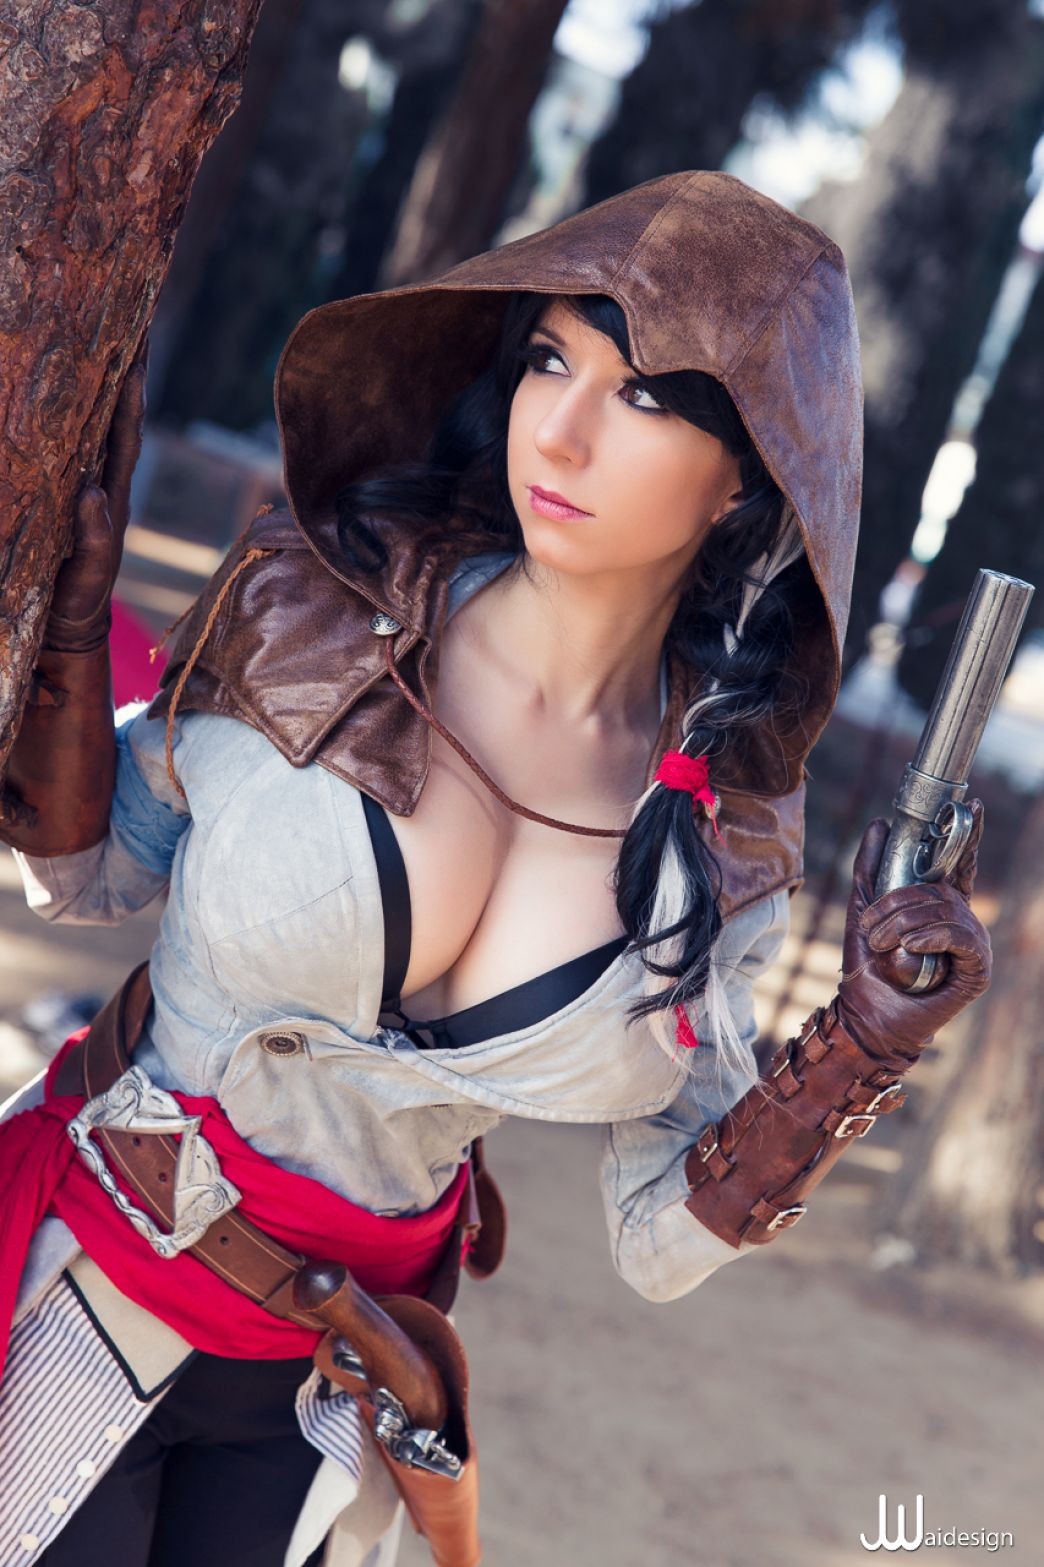 People 1044x1567 cosplay women boobs gun model Assassin's Creed big boobs Riki Le Cotey costumes cleavage girls with guns hoods video game girls weapon